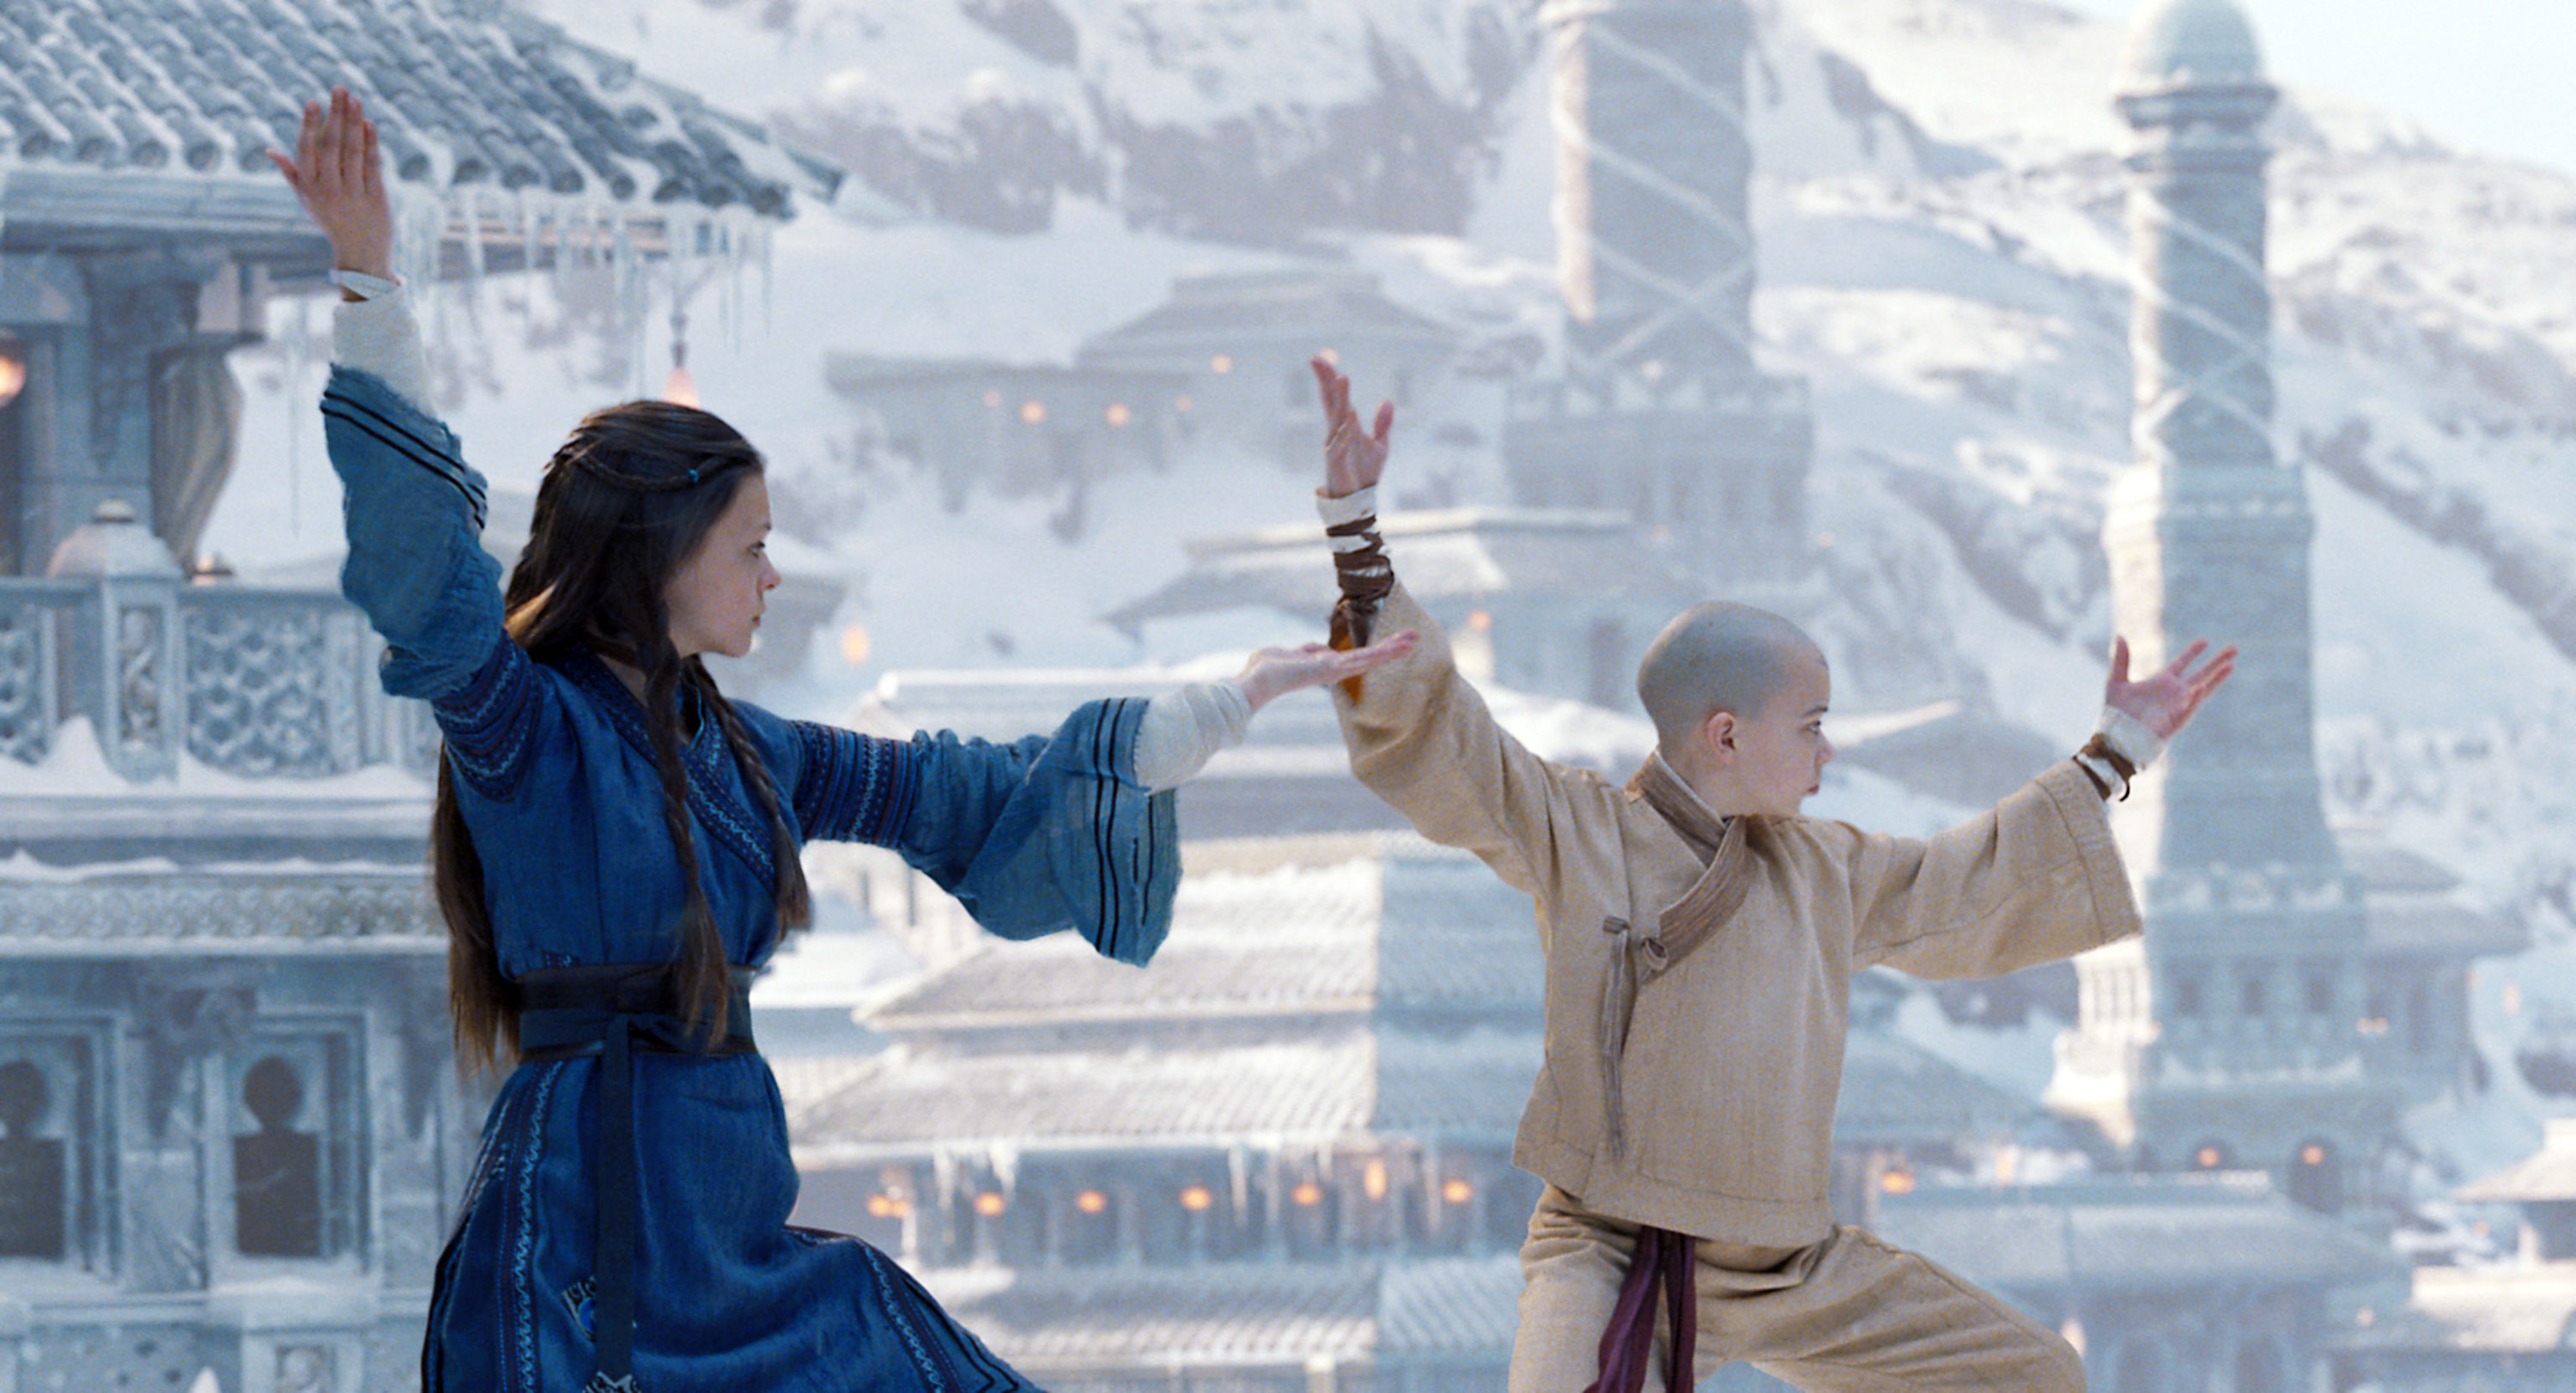 Aang and Katara in the live-action Last Airbender